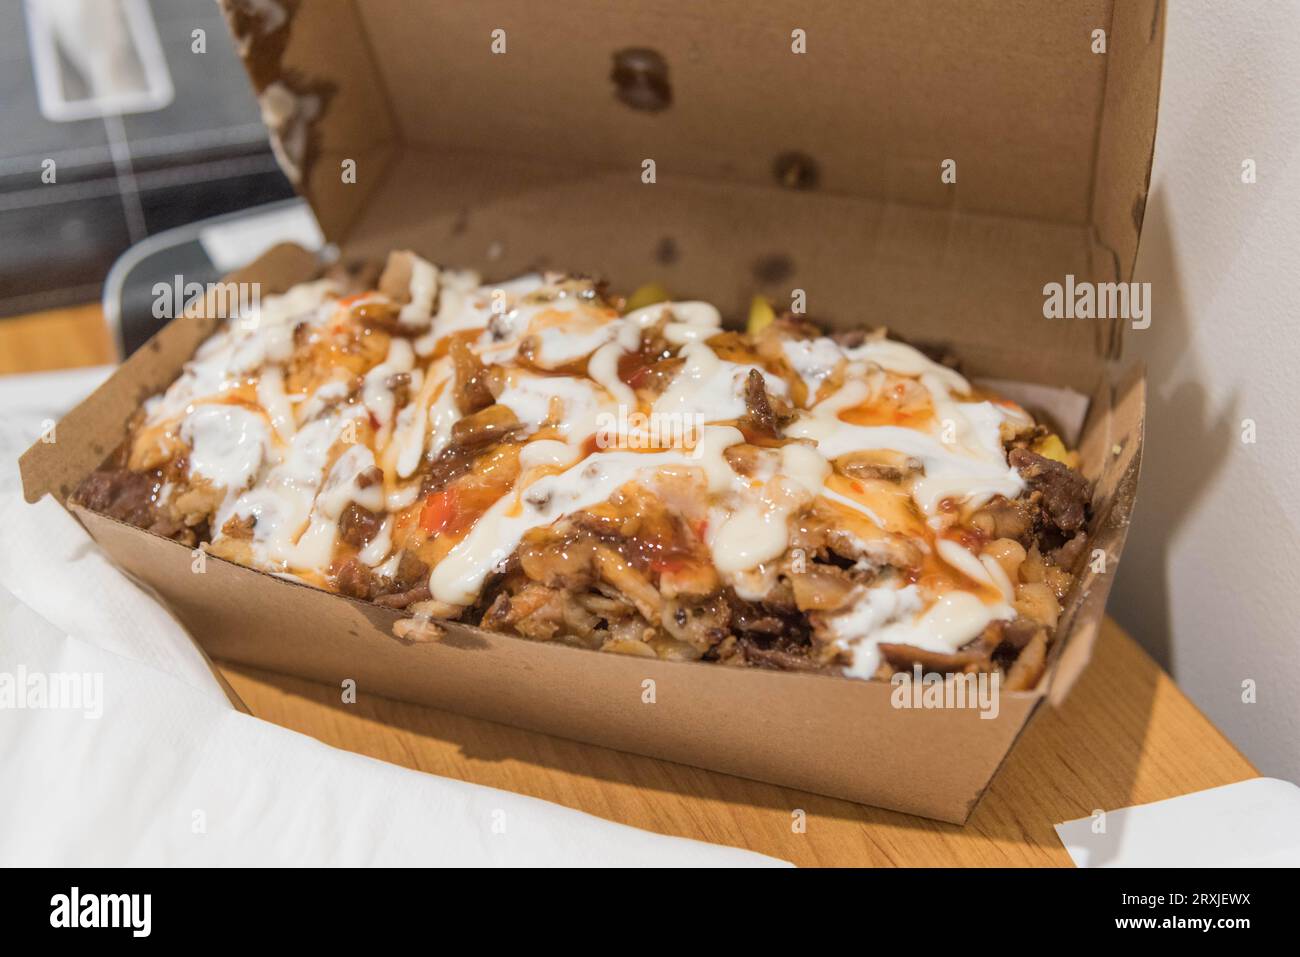 A takeaway pack of halal snack pack, an Australian fast food dish which is essentially fries loaded with kebab meat and sauces. Stock Photo